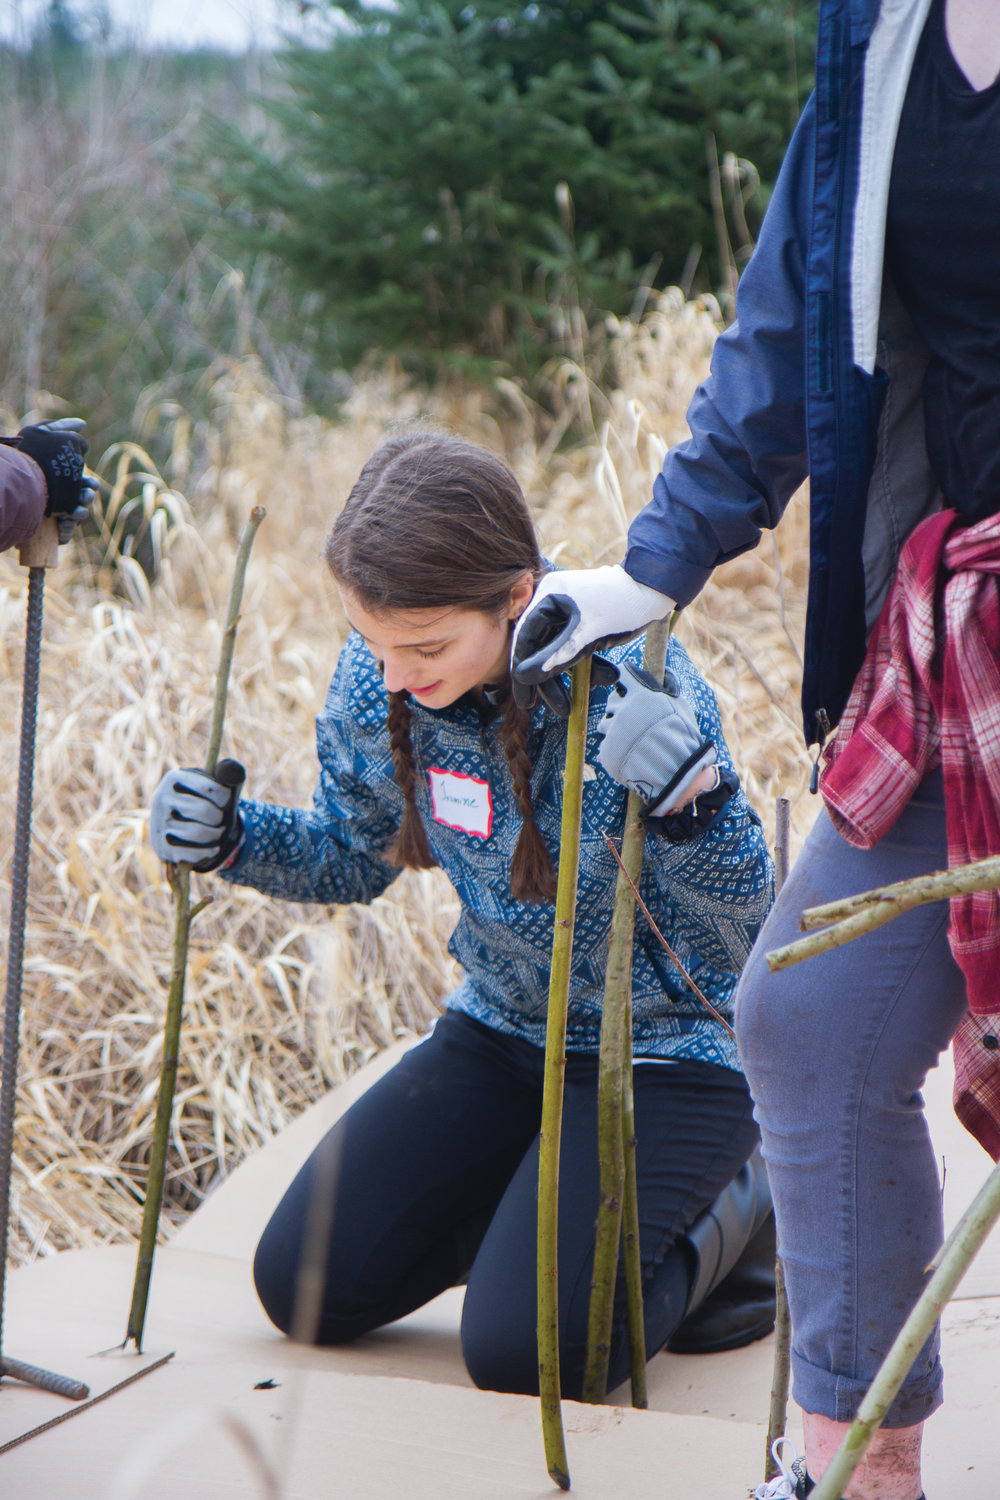 Jasmine Yearian instructs her fellow tree-planters on spacing willow cuttings.